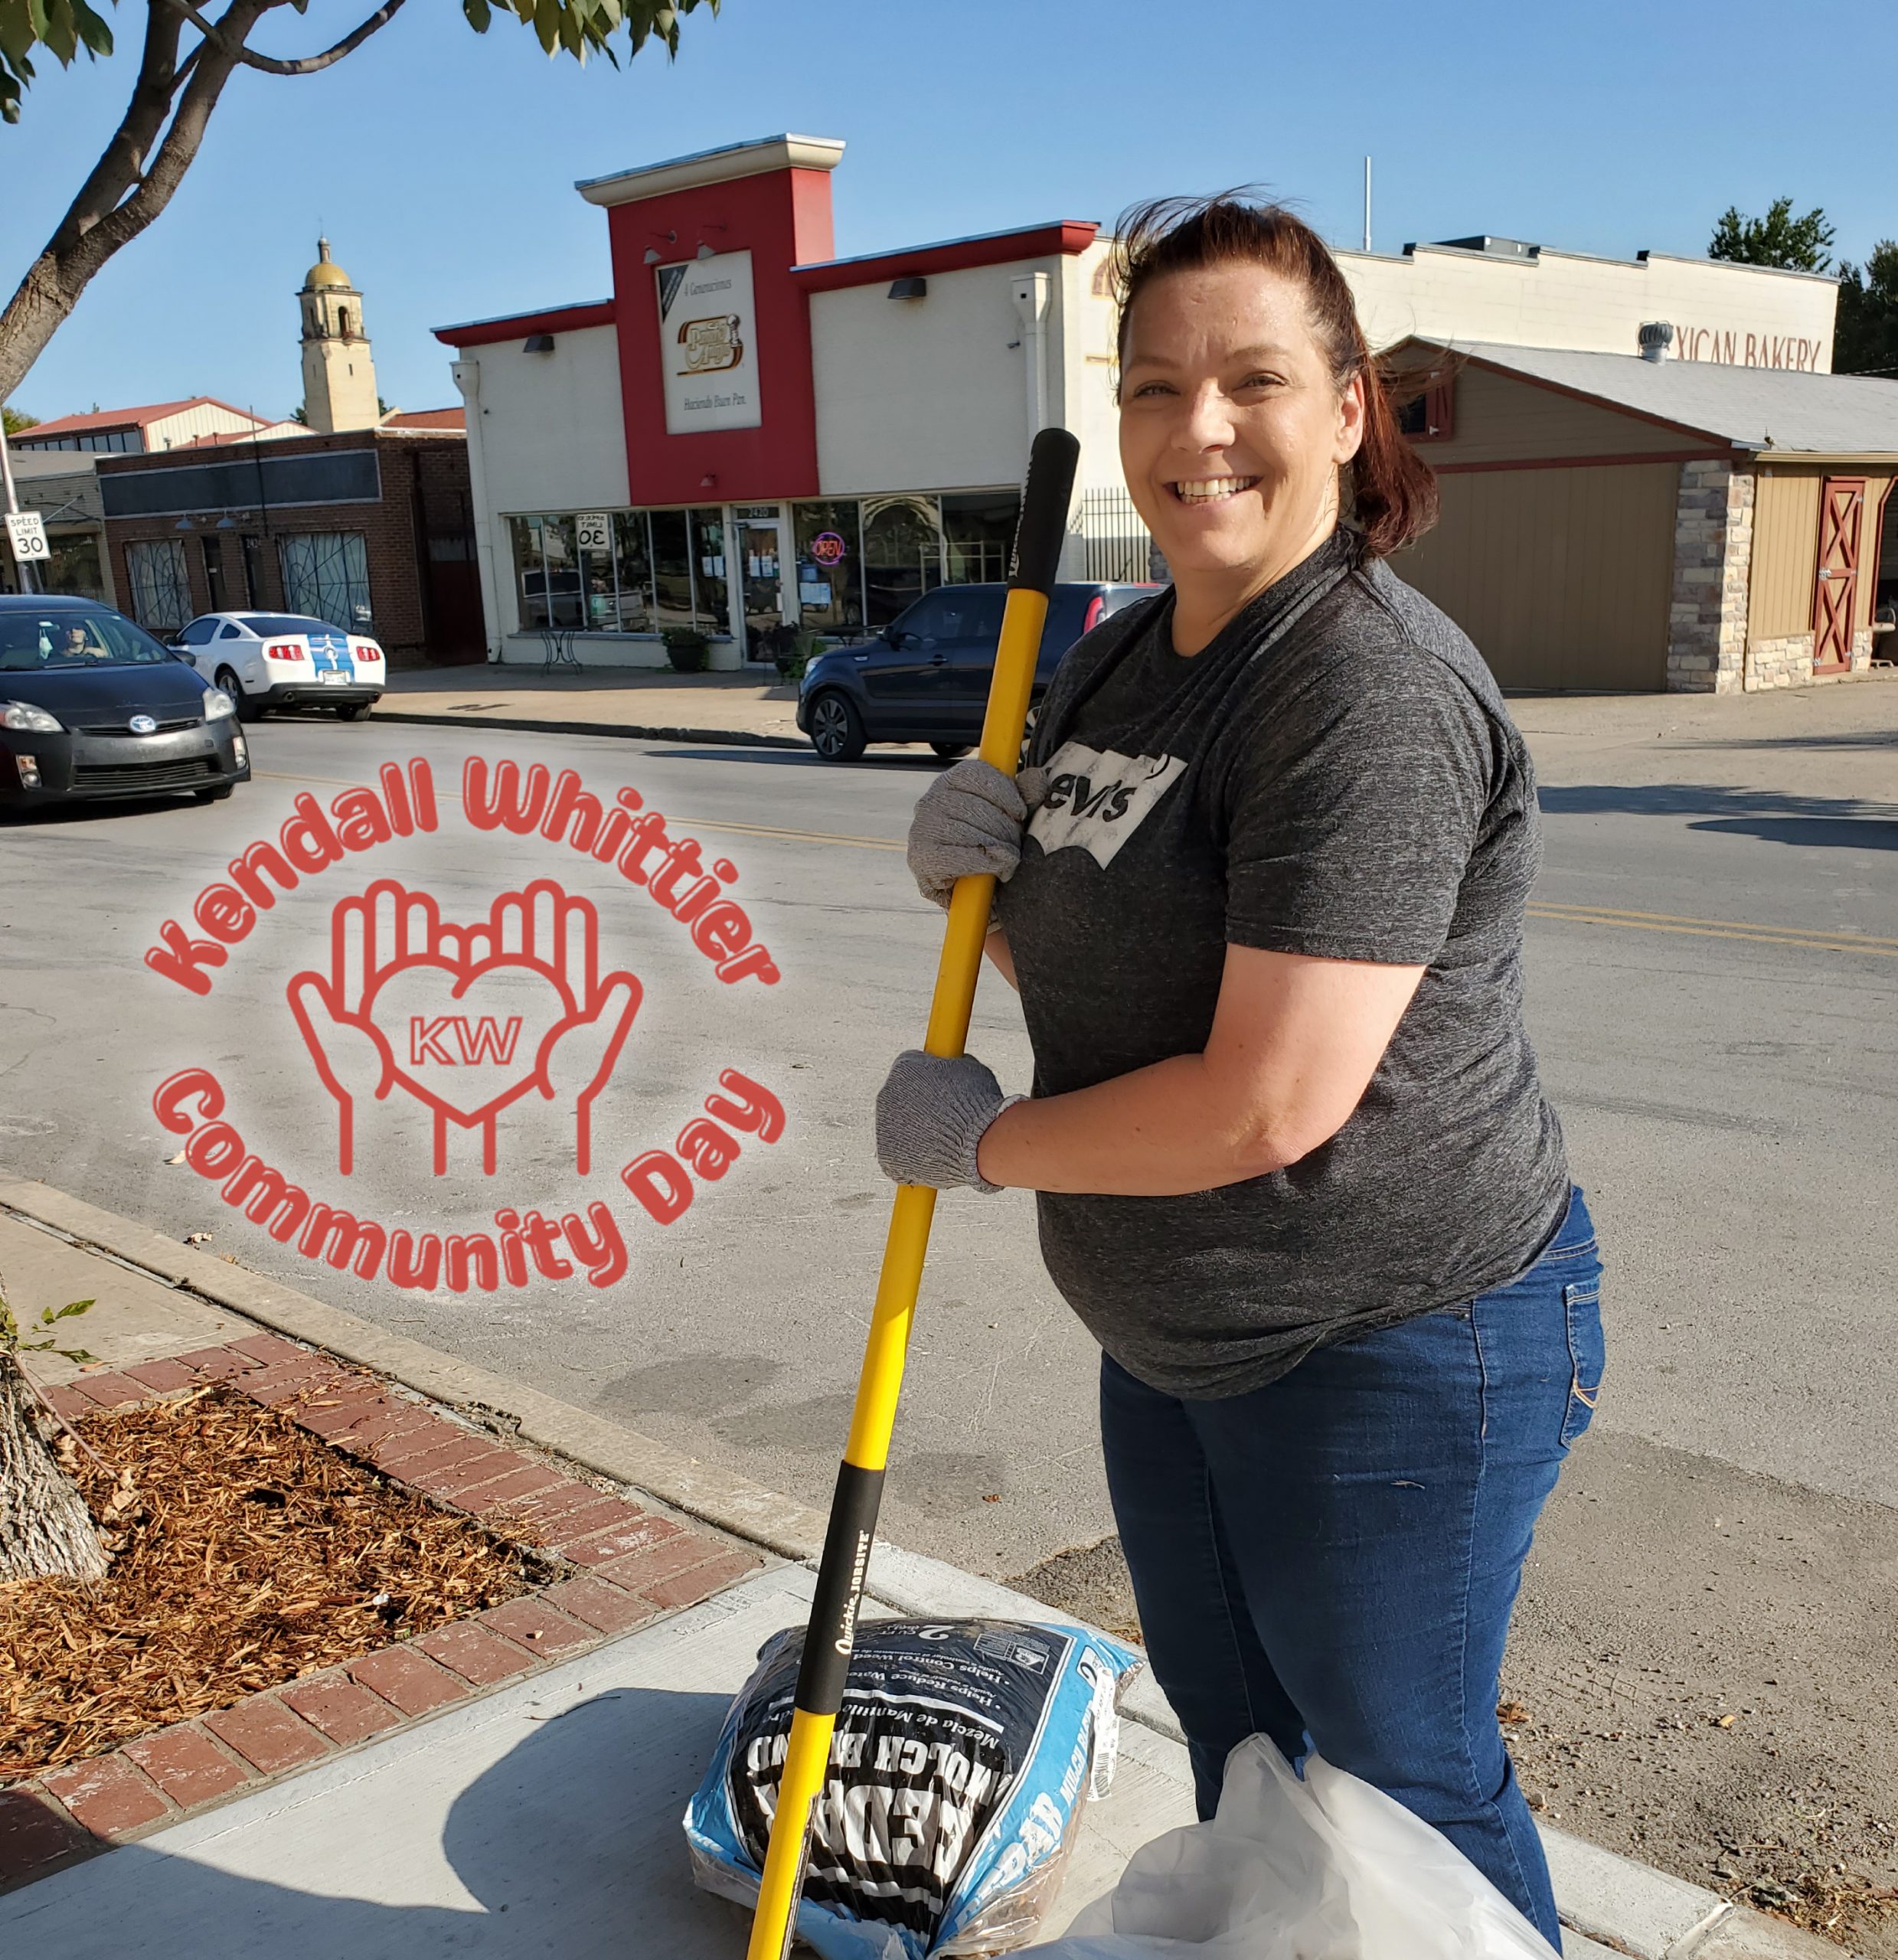 KWMS to host community clean up Saturday, volunteer slots still available